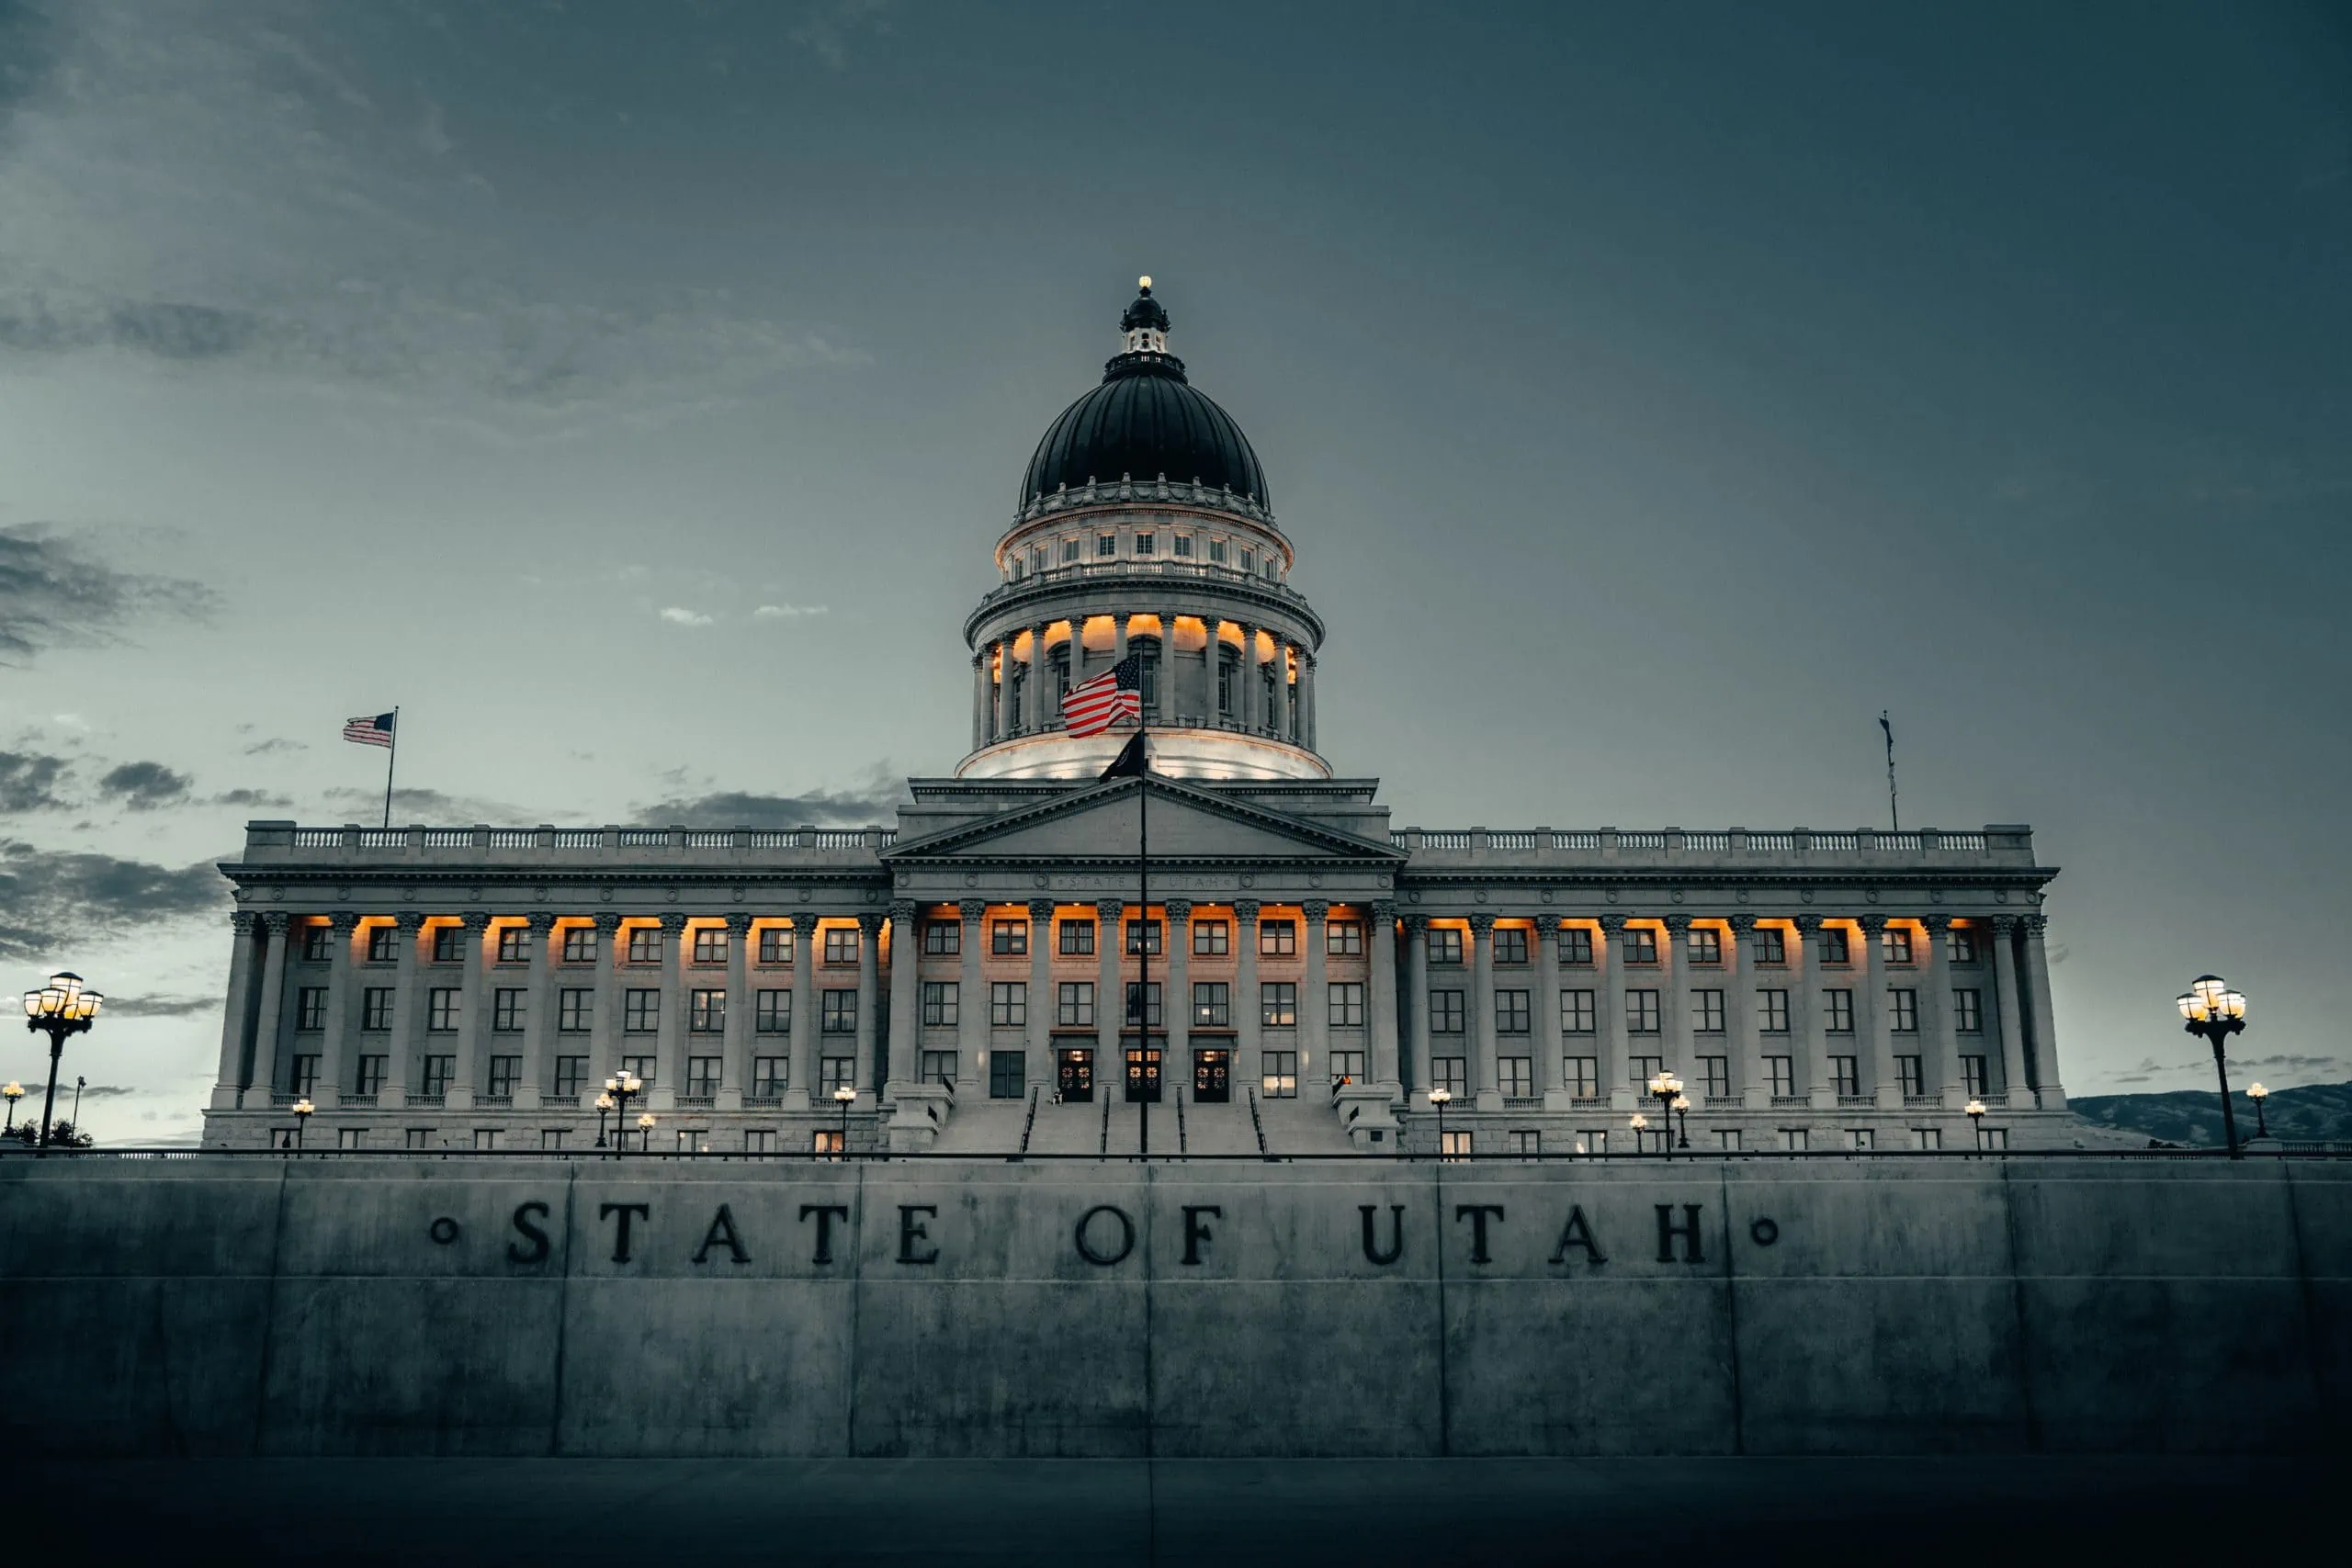 Utah government building that has security system in place